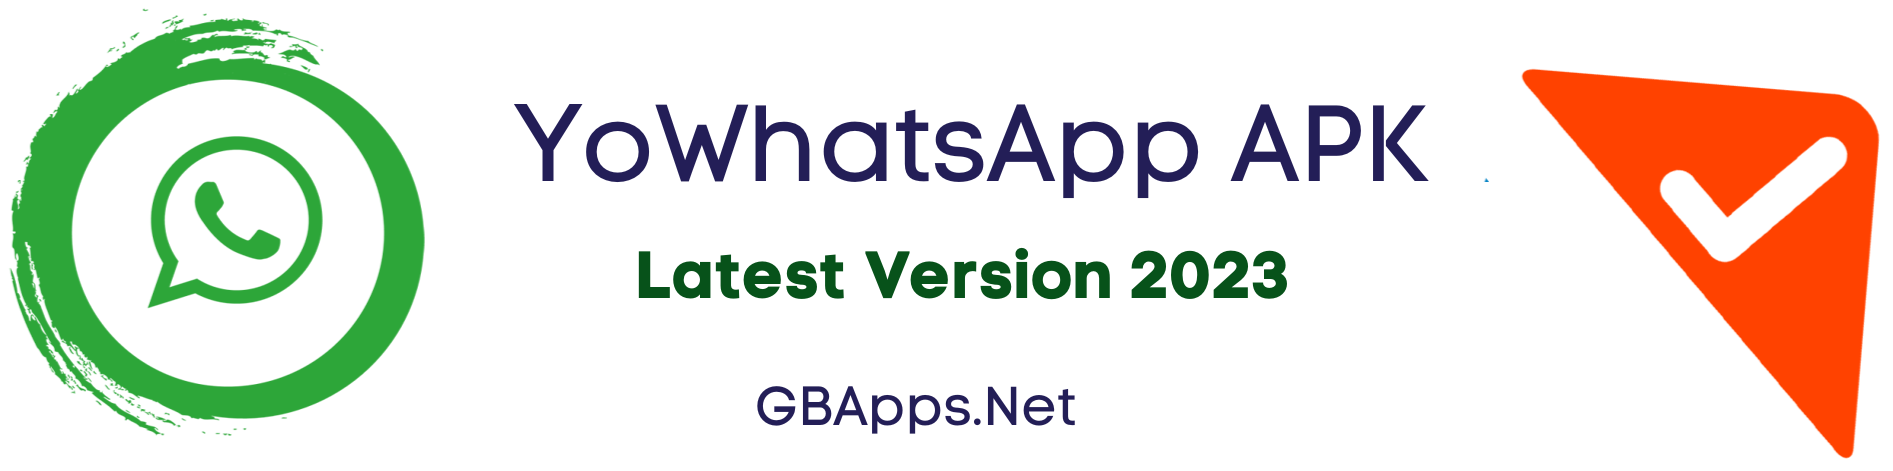 download the new version WhatsApp (2.2336.7.0)